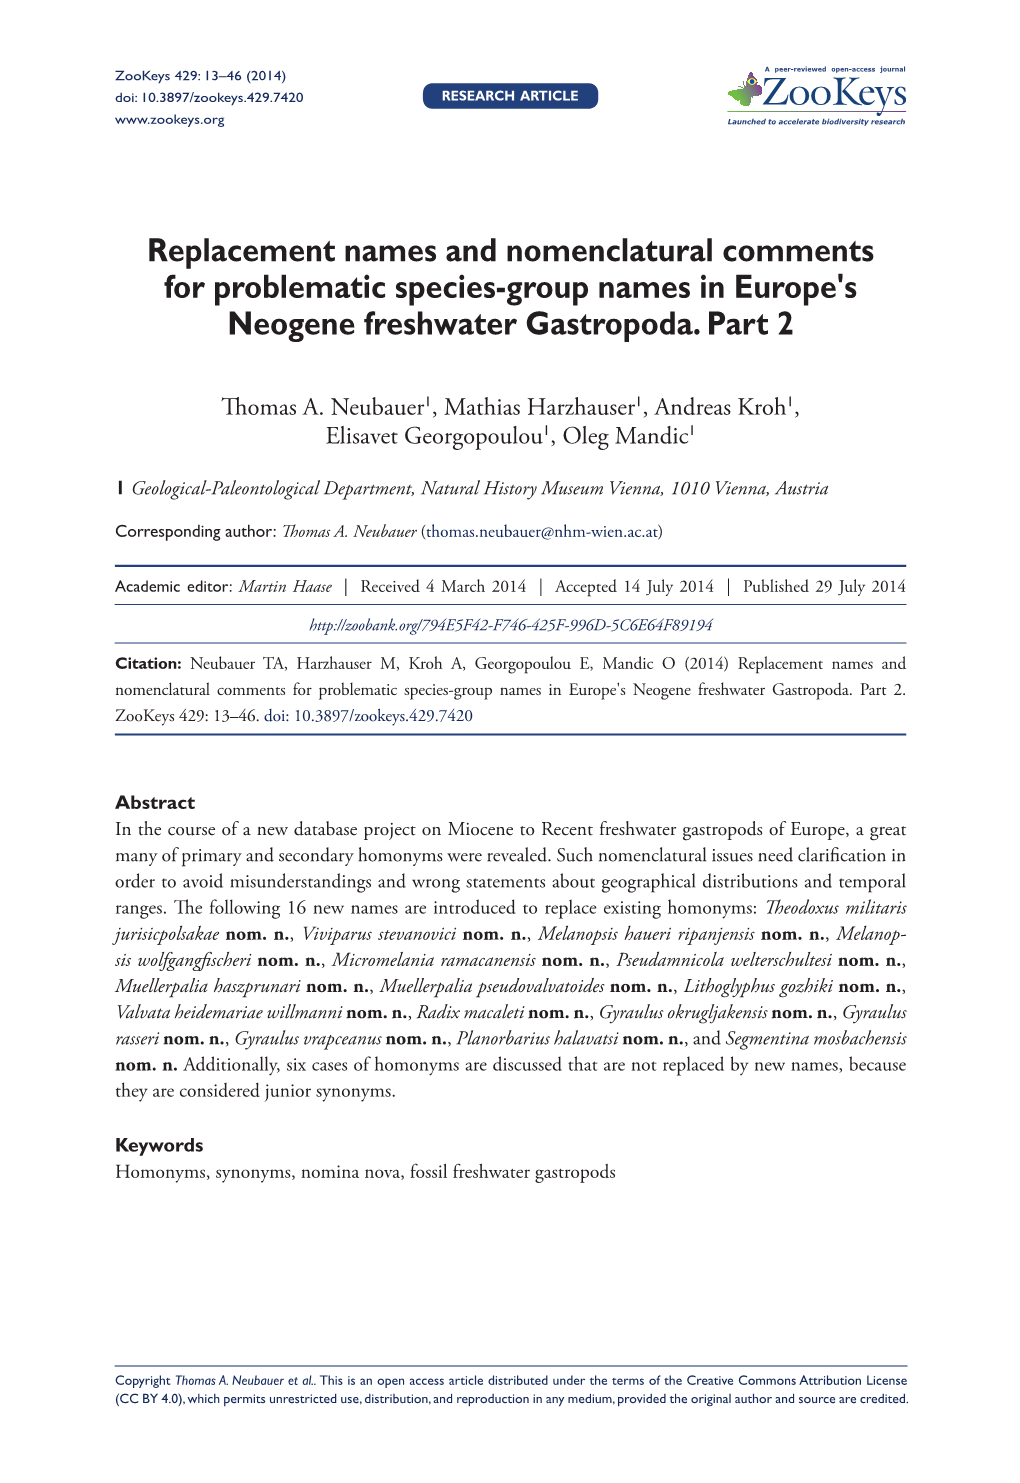 Replacement Names and Nomenclatural Comments for Problematic Species-Group Names in Europe's Neogene Freshwater Gastropoda